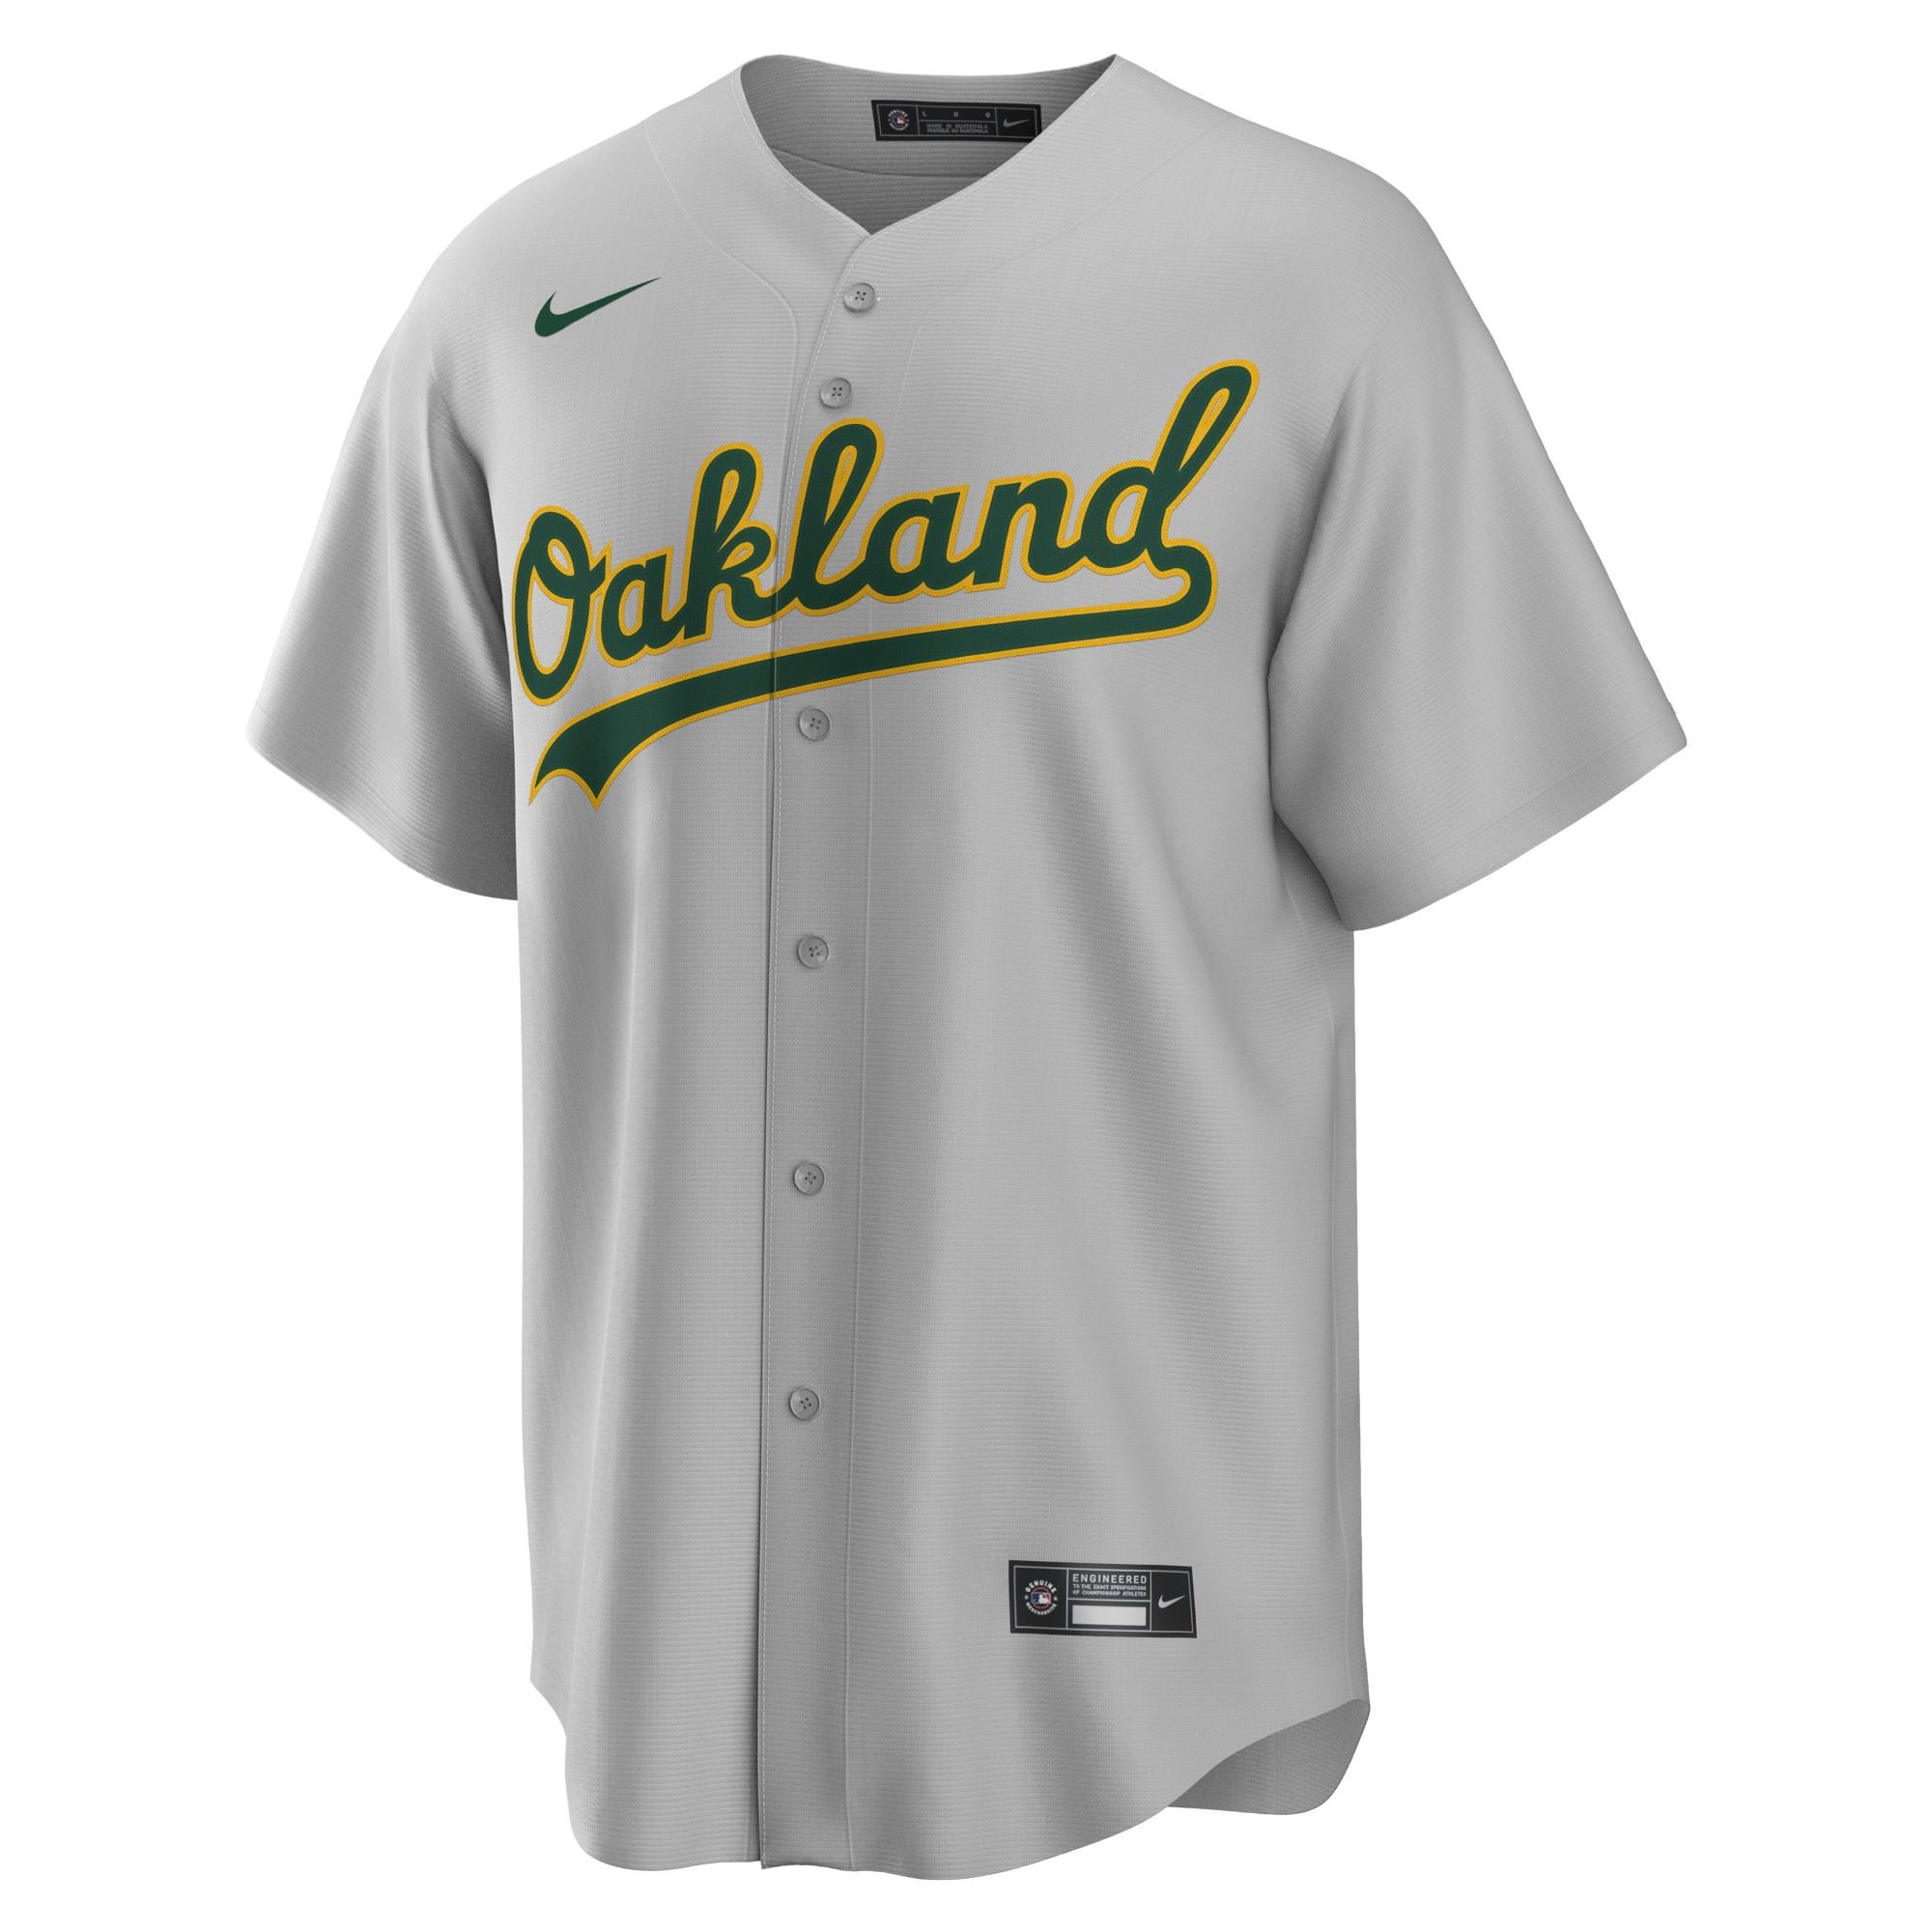 Oakland Athletics Gray Official MLB Replica Road Jersey Nike